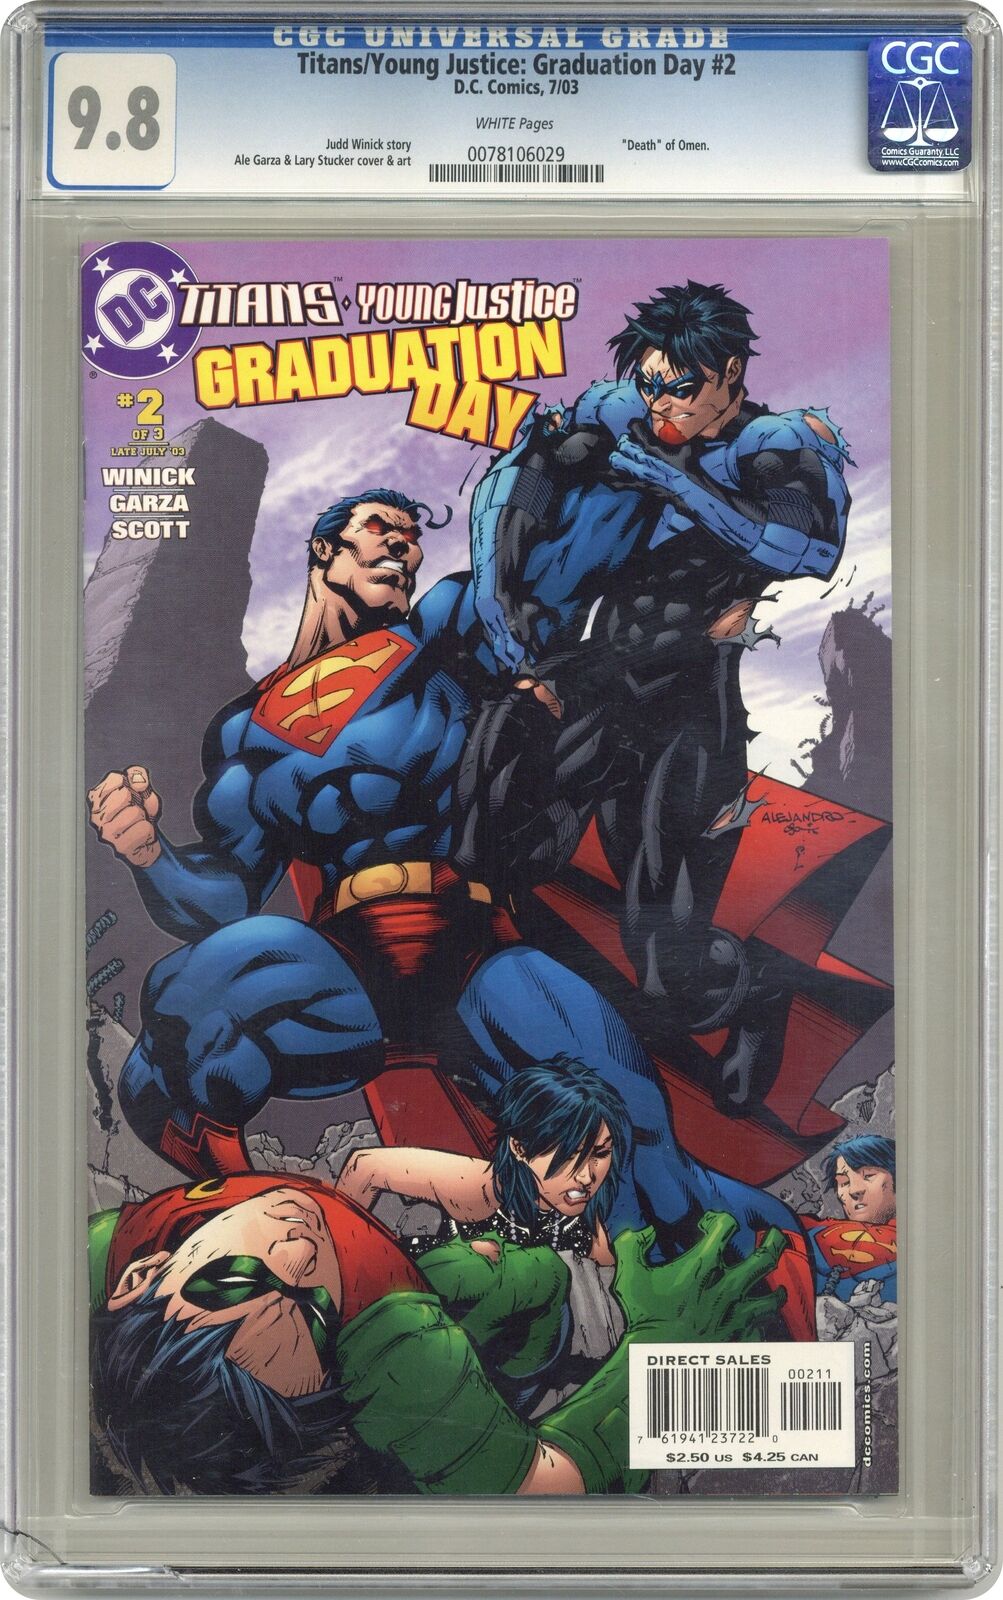 Titans Young Justice Graduation Day #2 CGC 9.8 2003 0078106029